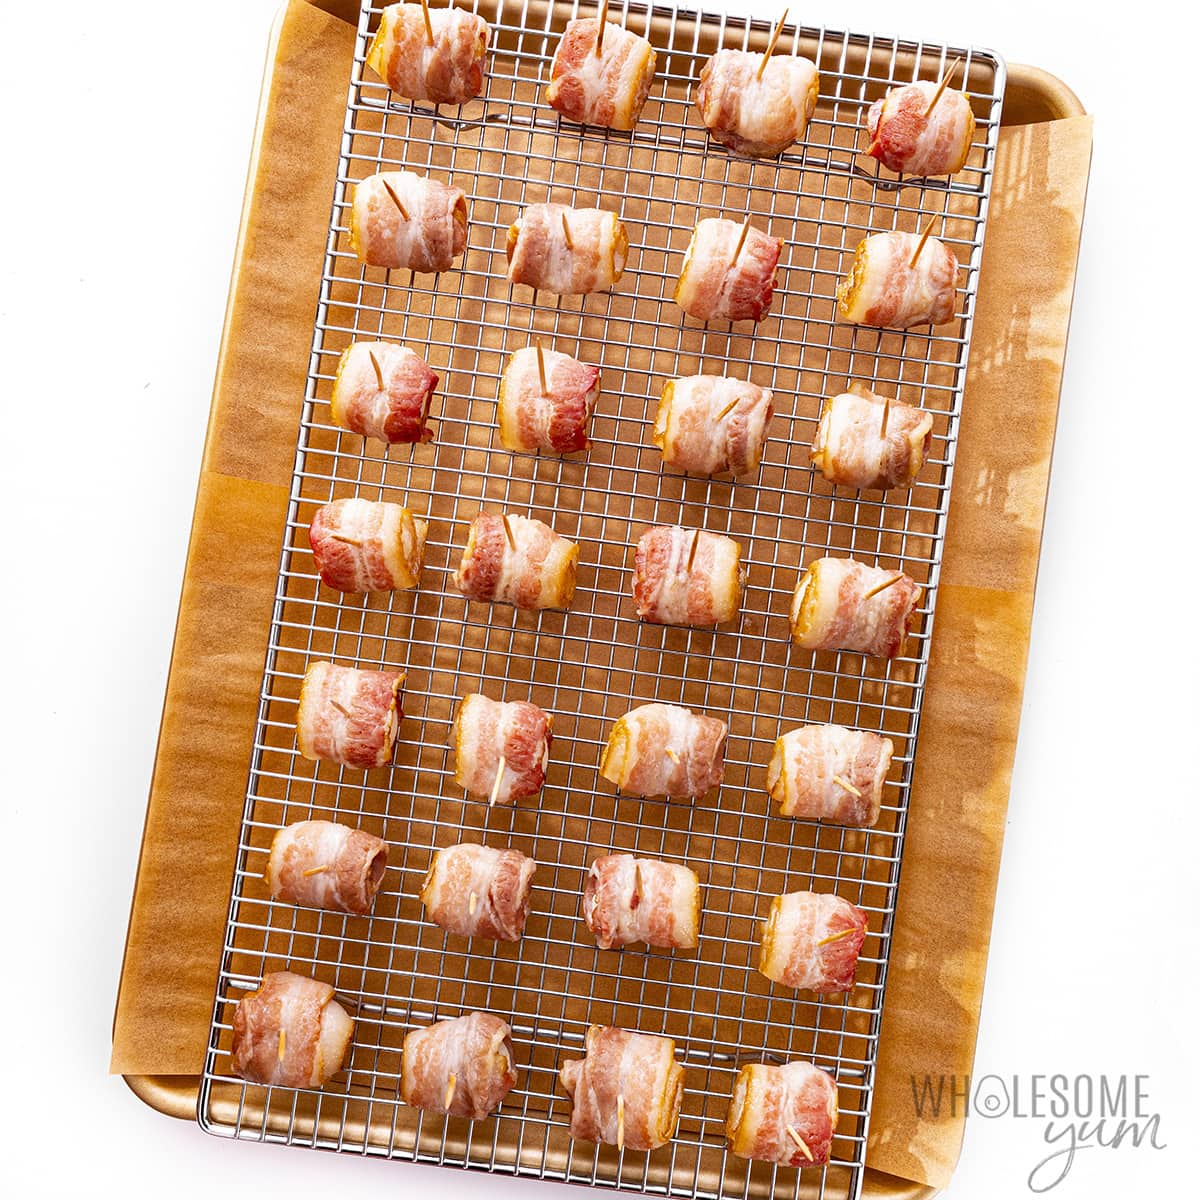 Water chestnuts wrapped in bacon and secured with a toothpick.